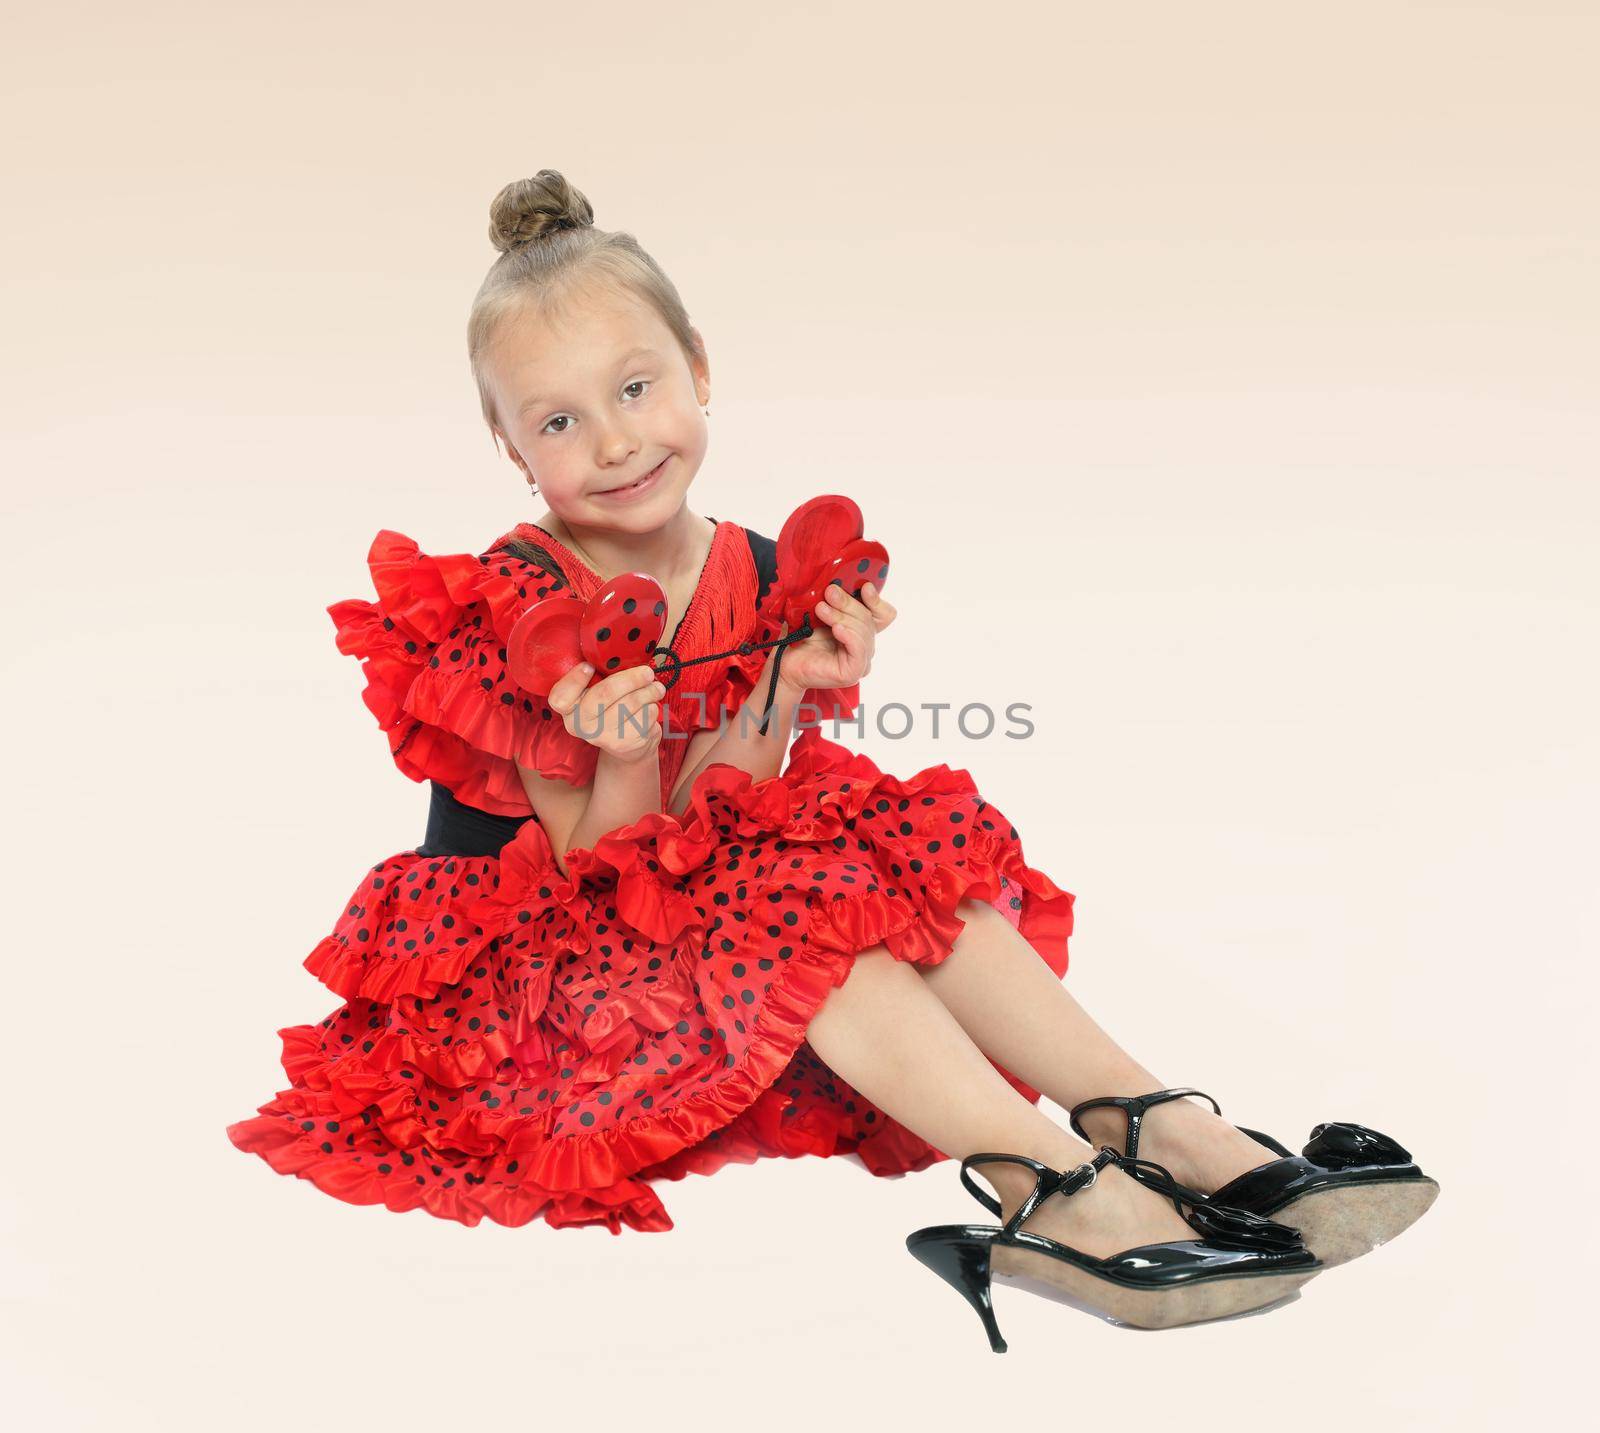 little girl in a bright red dress sitting on the floor in shoes on a high heel.the concept of fashion.